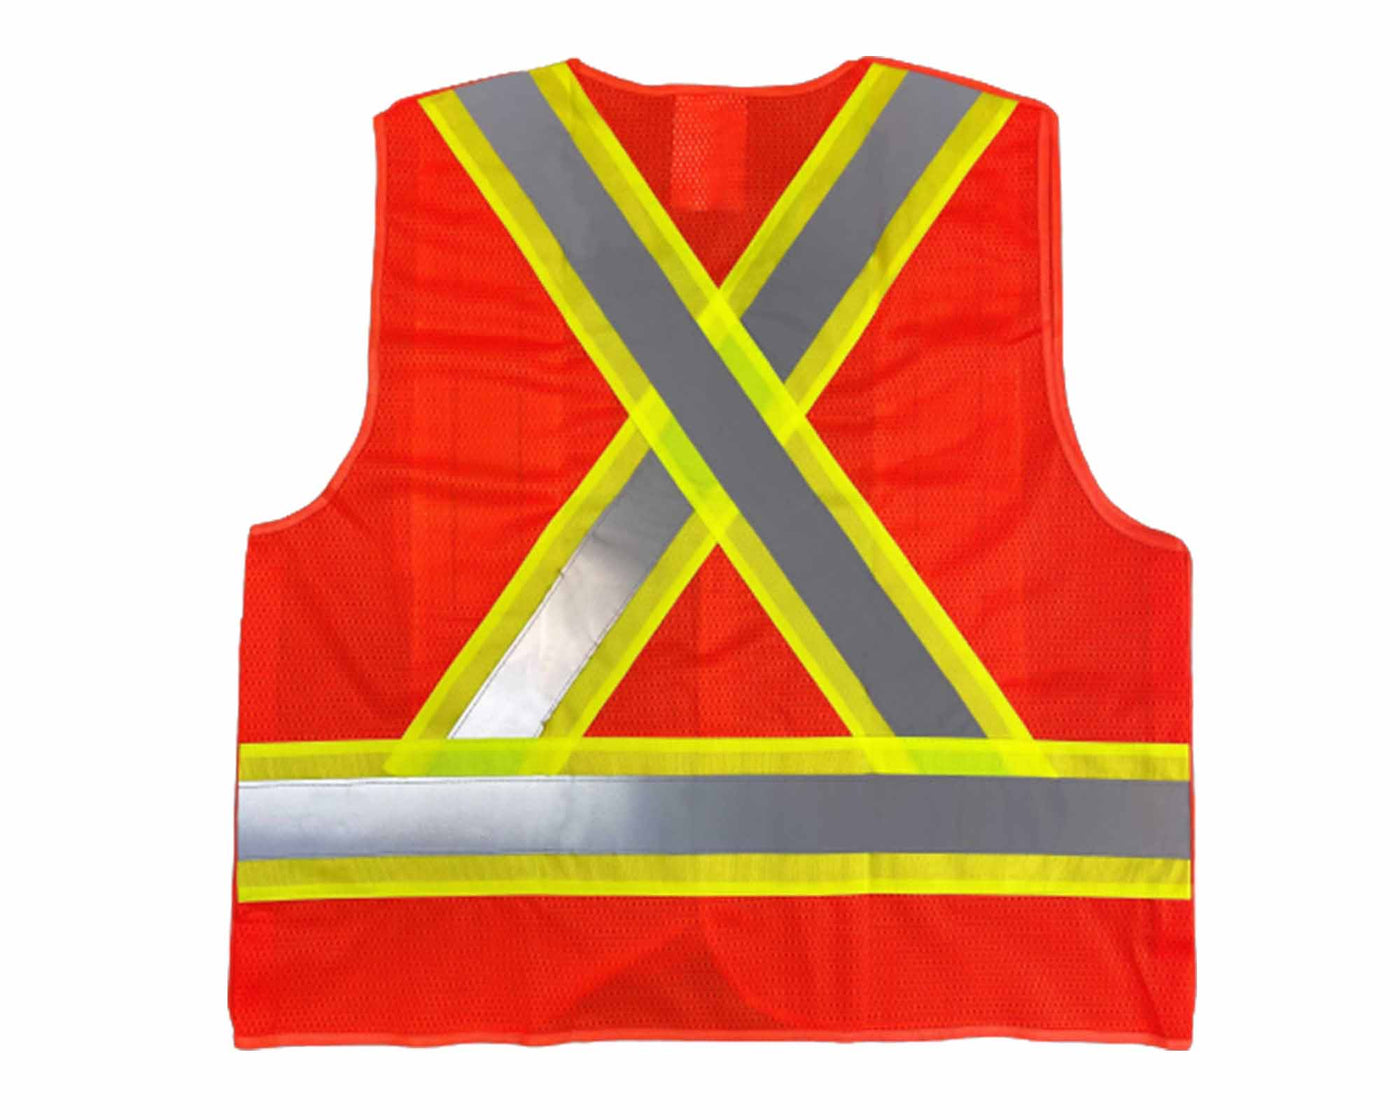 back view of industrial orange safety vest with reflective stripe